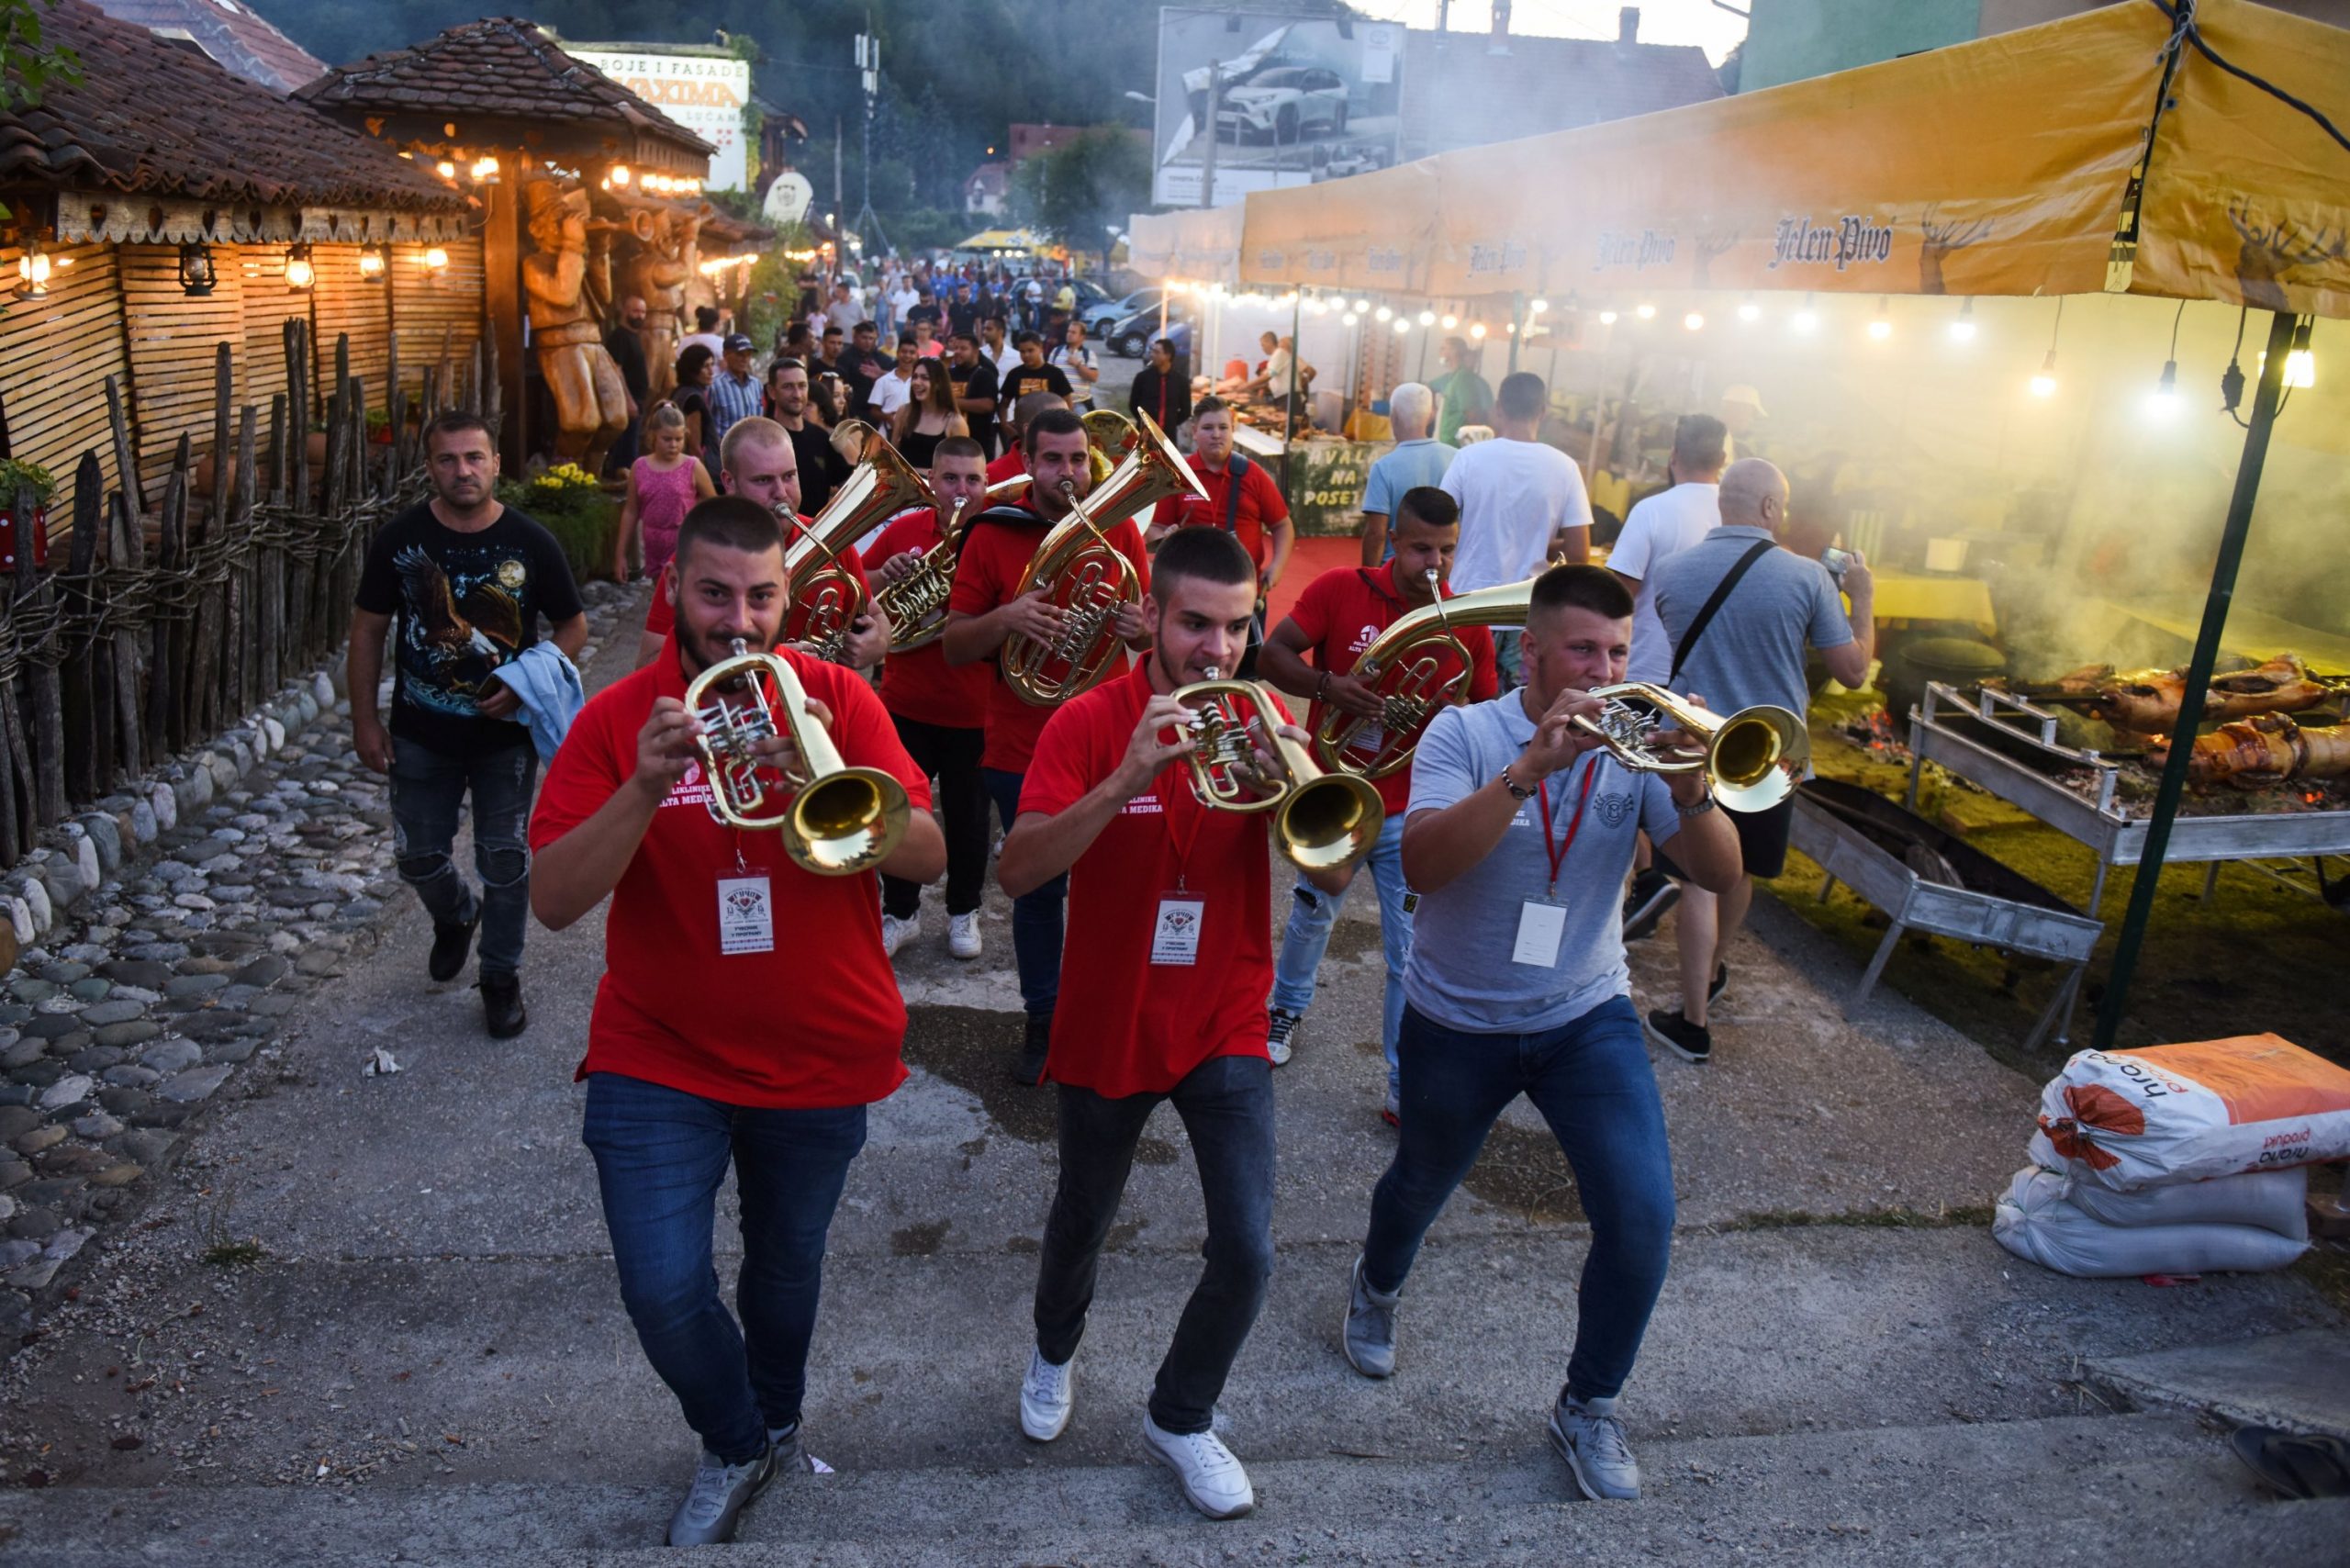 Musicians at Serbian trumpet festival play on despite pandemic